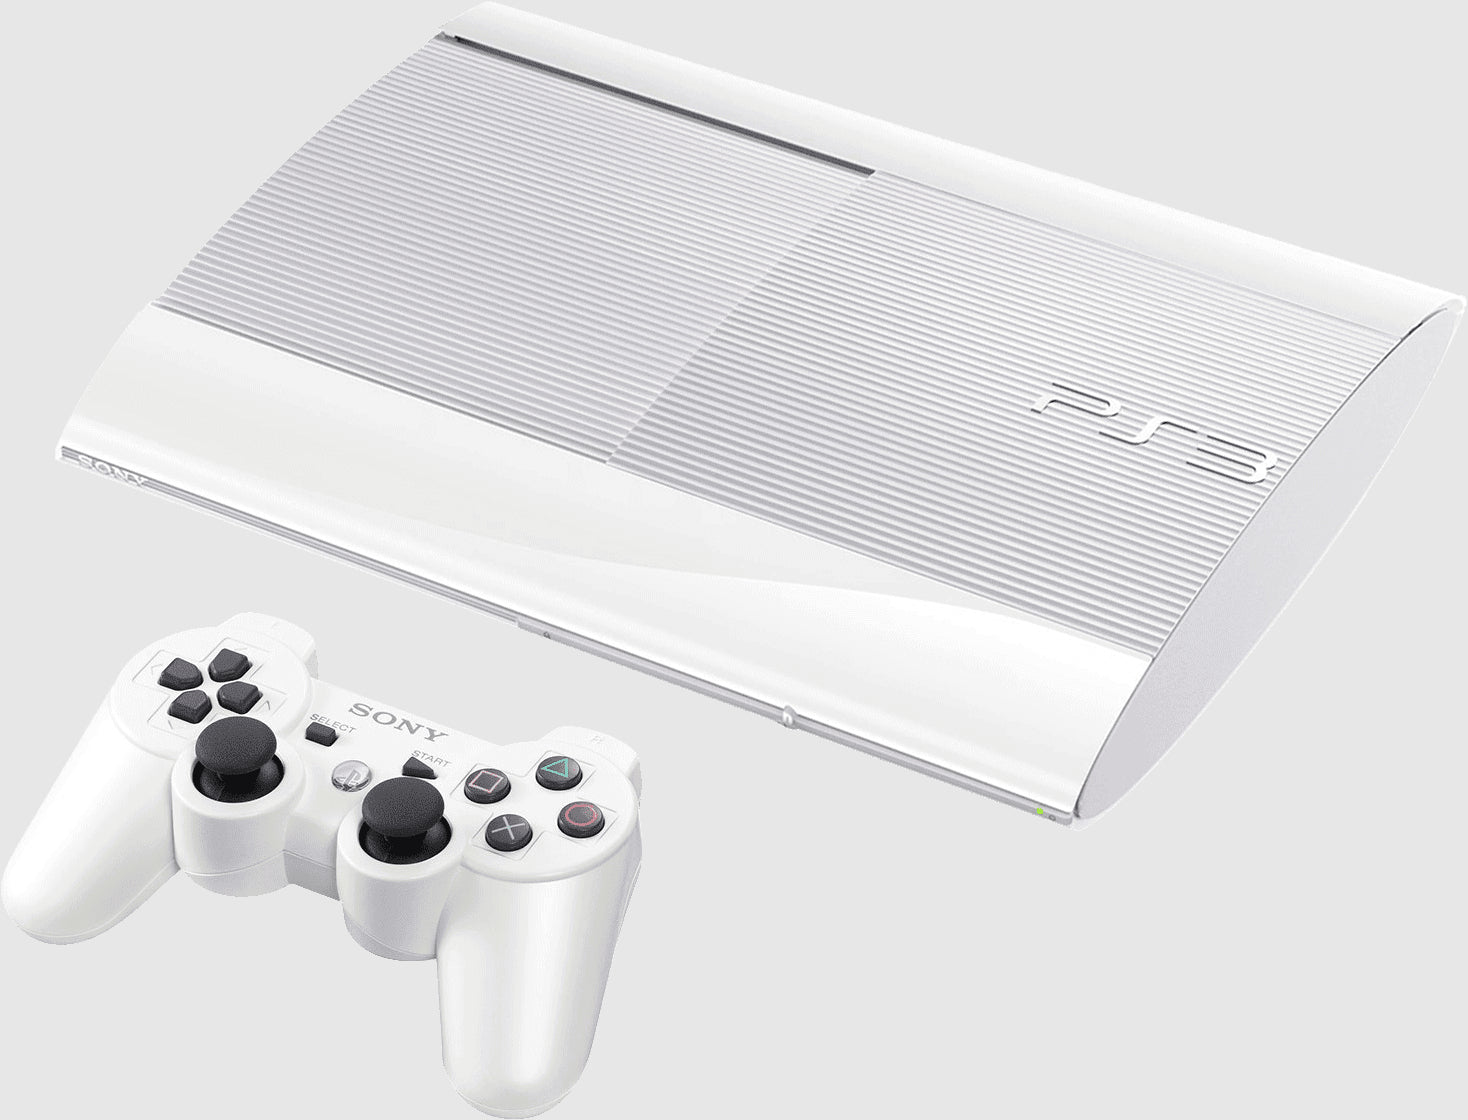 Playstation 3 Super Slim Top Loading 500GB Console - White 4001C